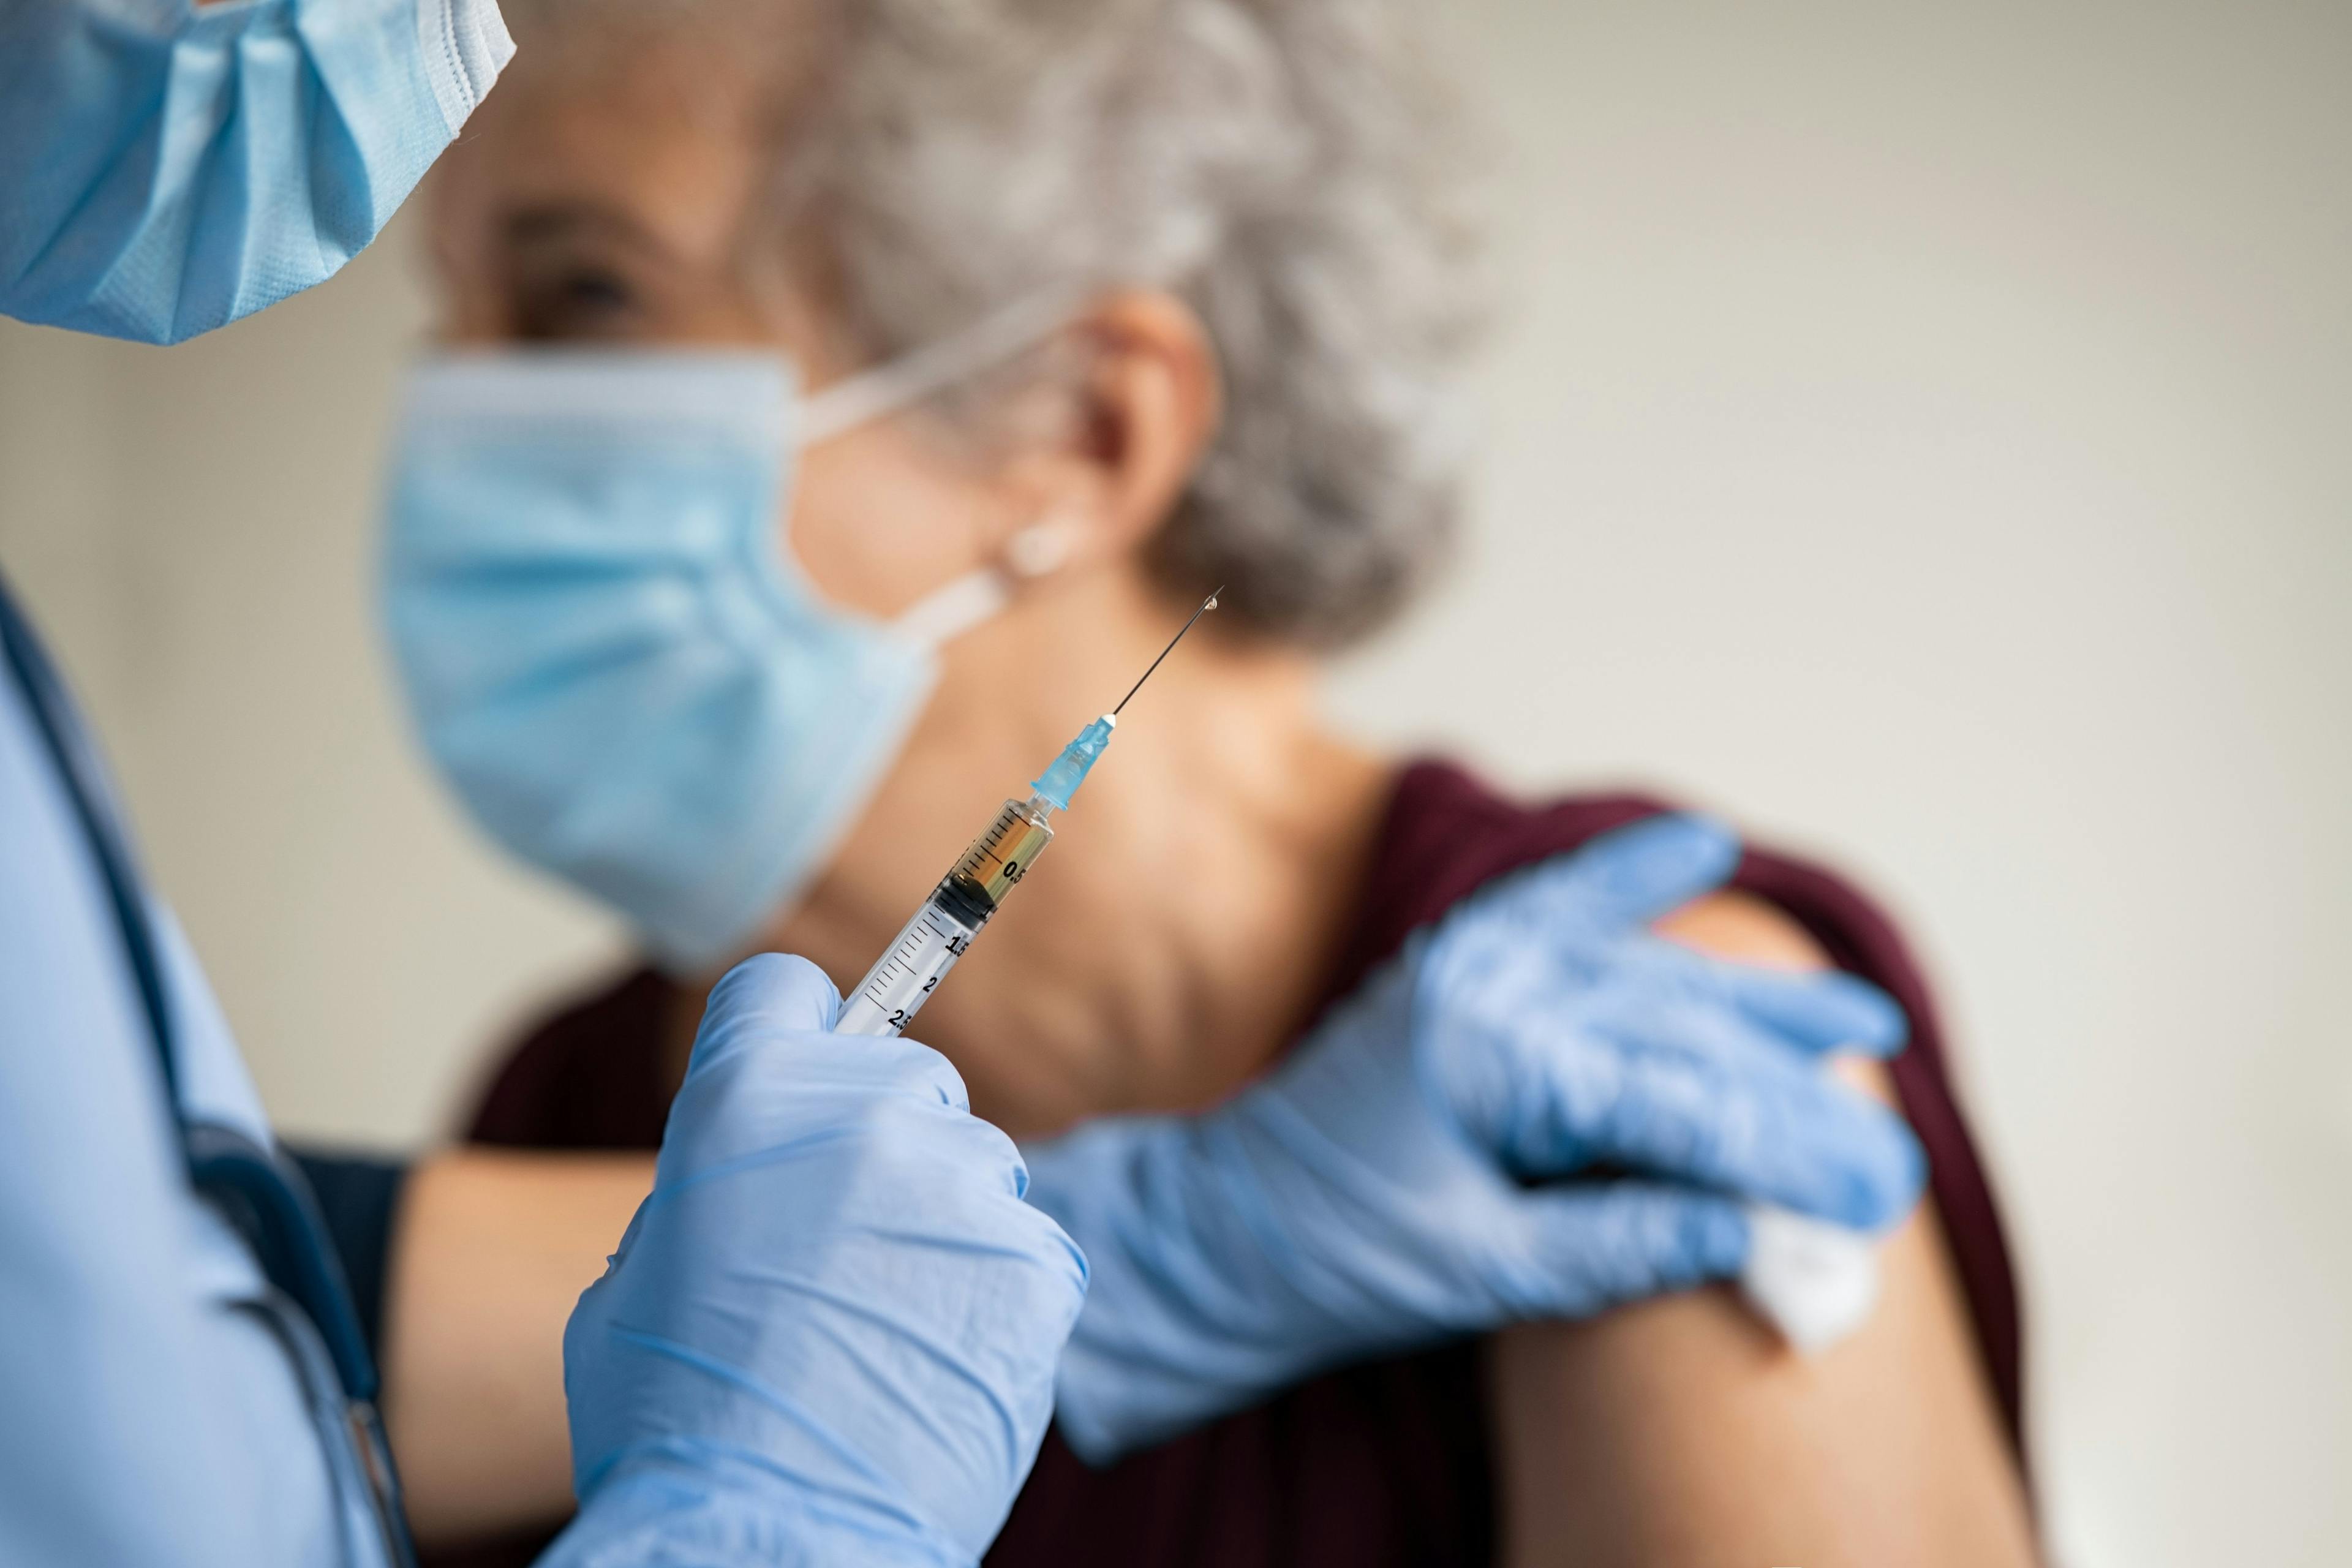 Less Nursing Home Residents, Staff Are Up-to-Date on Covid Vaccinations Amid Winter Surge